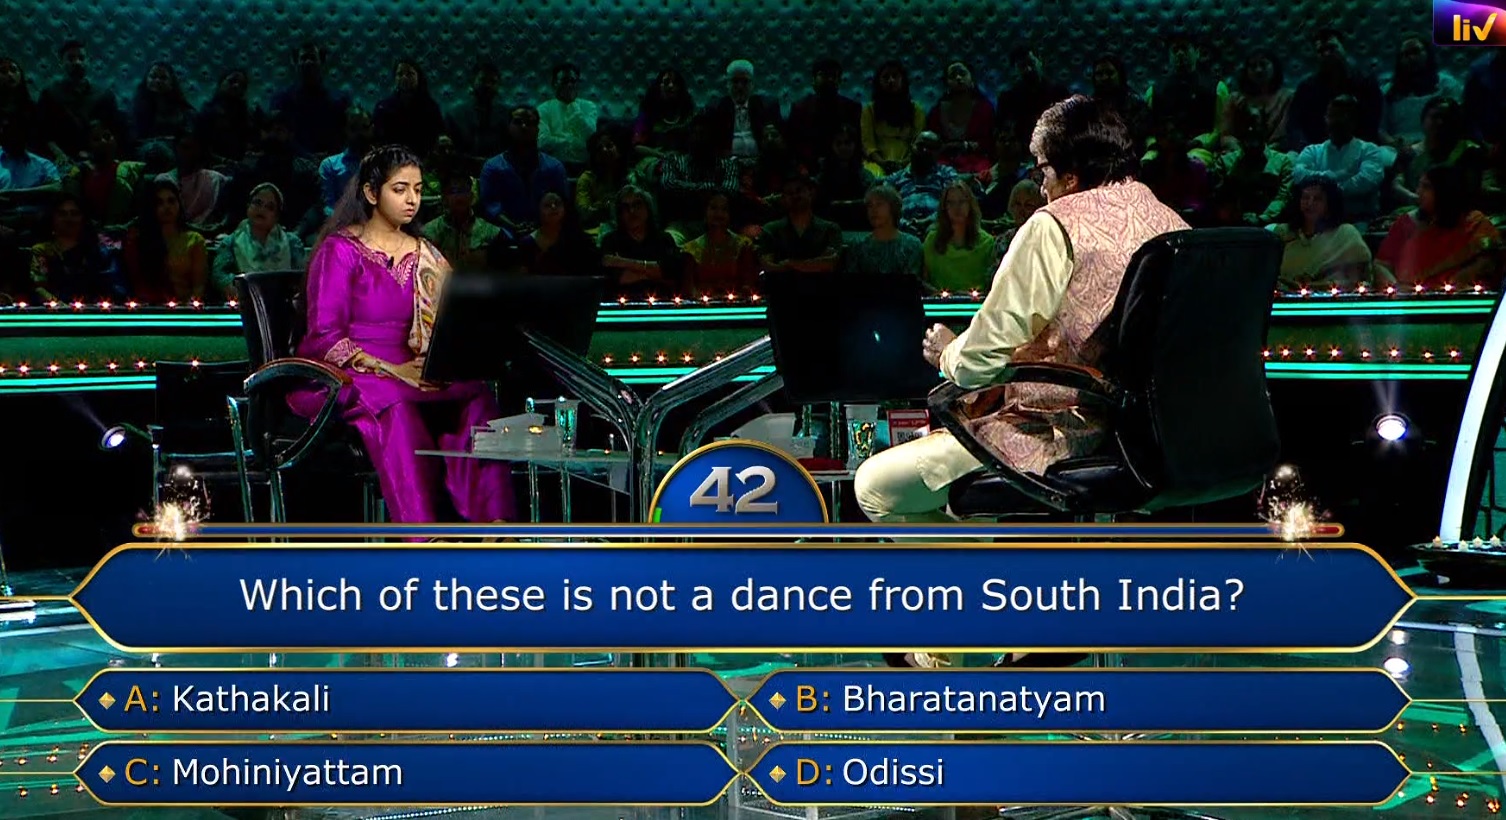 Ques : Which of these is not a dance from South India?